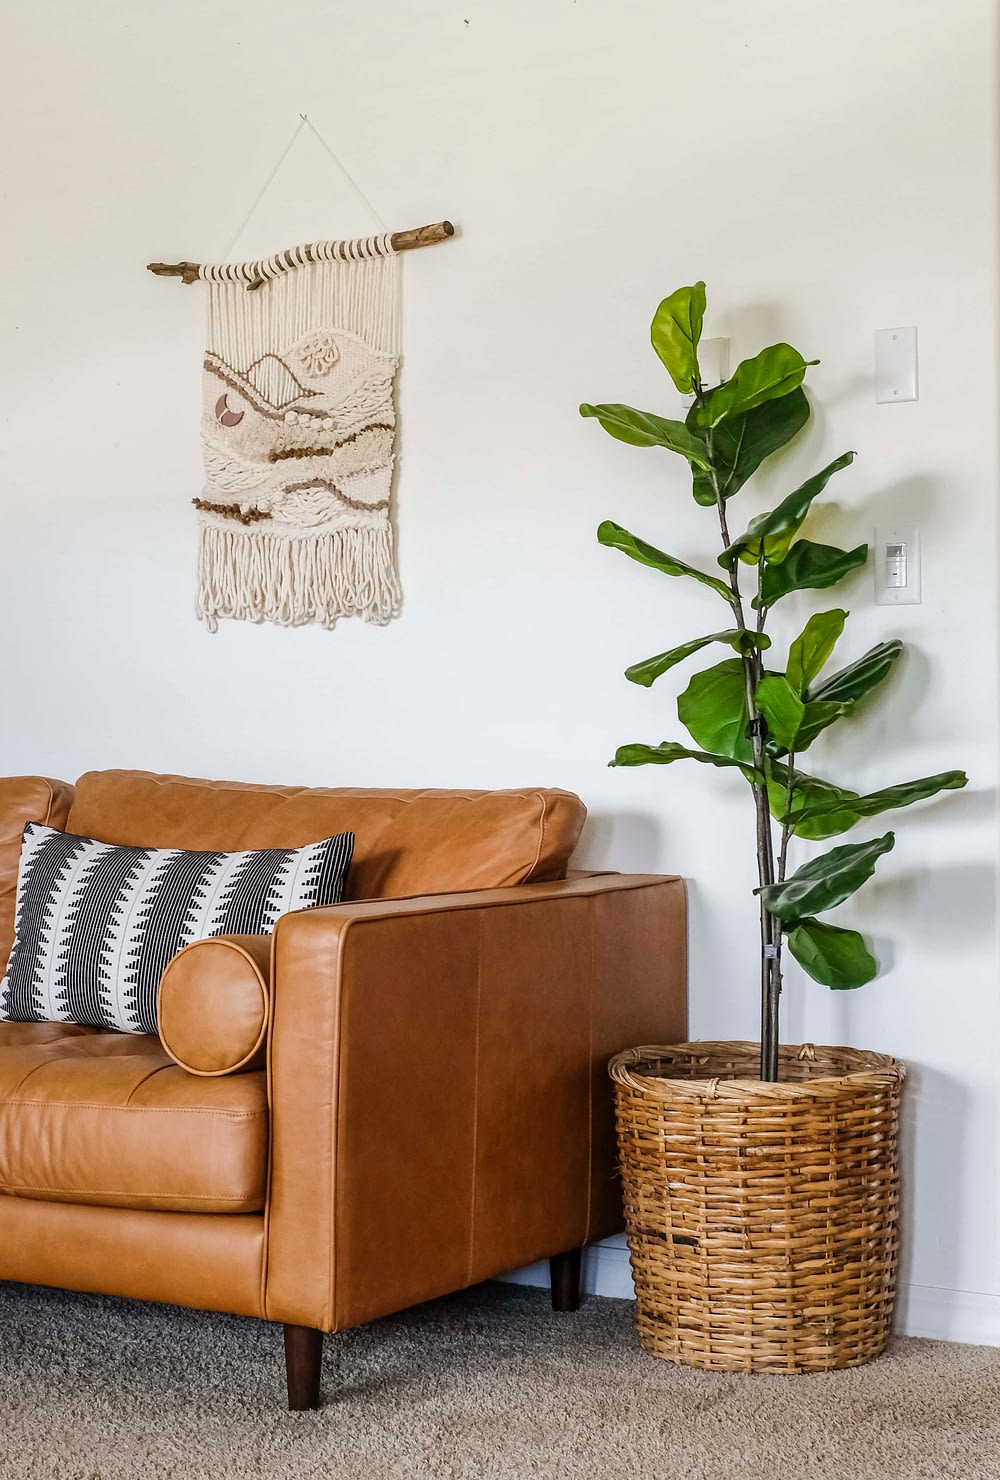 faux fiddle leaf fig tree in a woven basket sitting in a living room